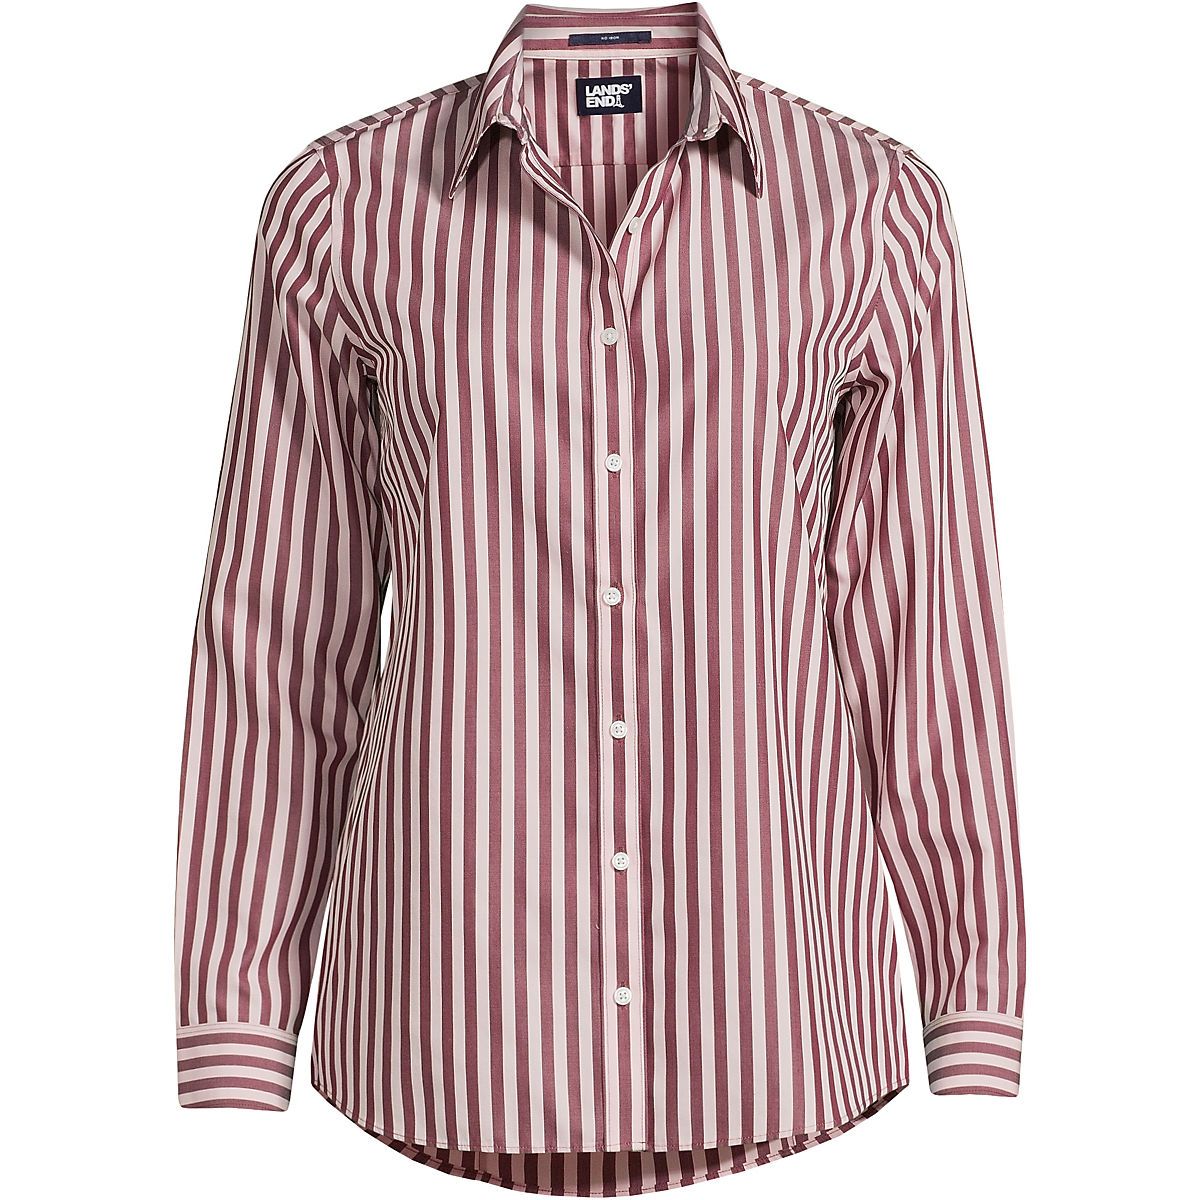 Women's Wrinkle Free No Iron Button Front Shirt | Lands' End (US)